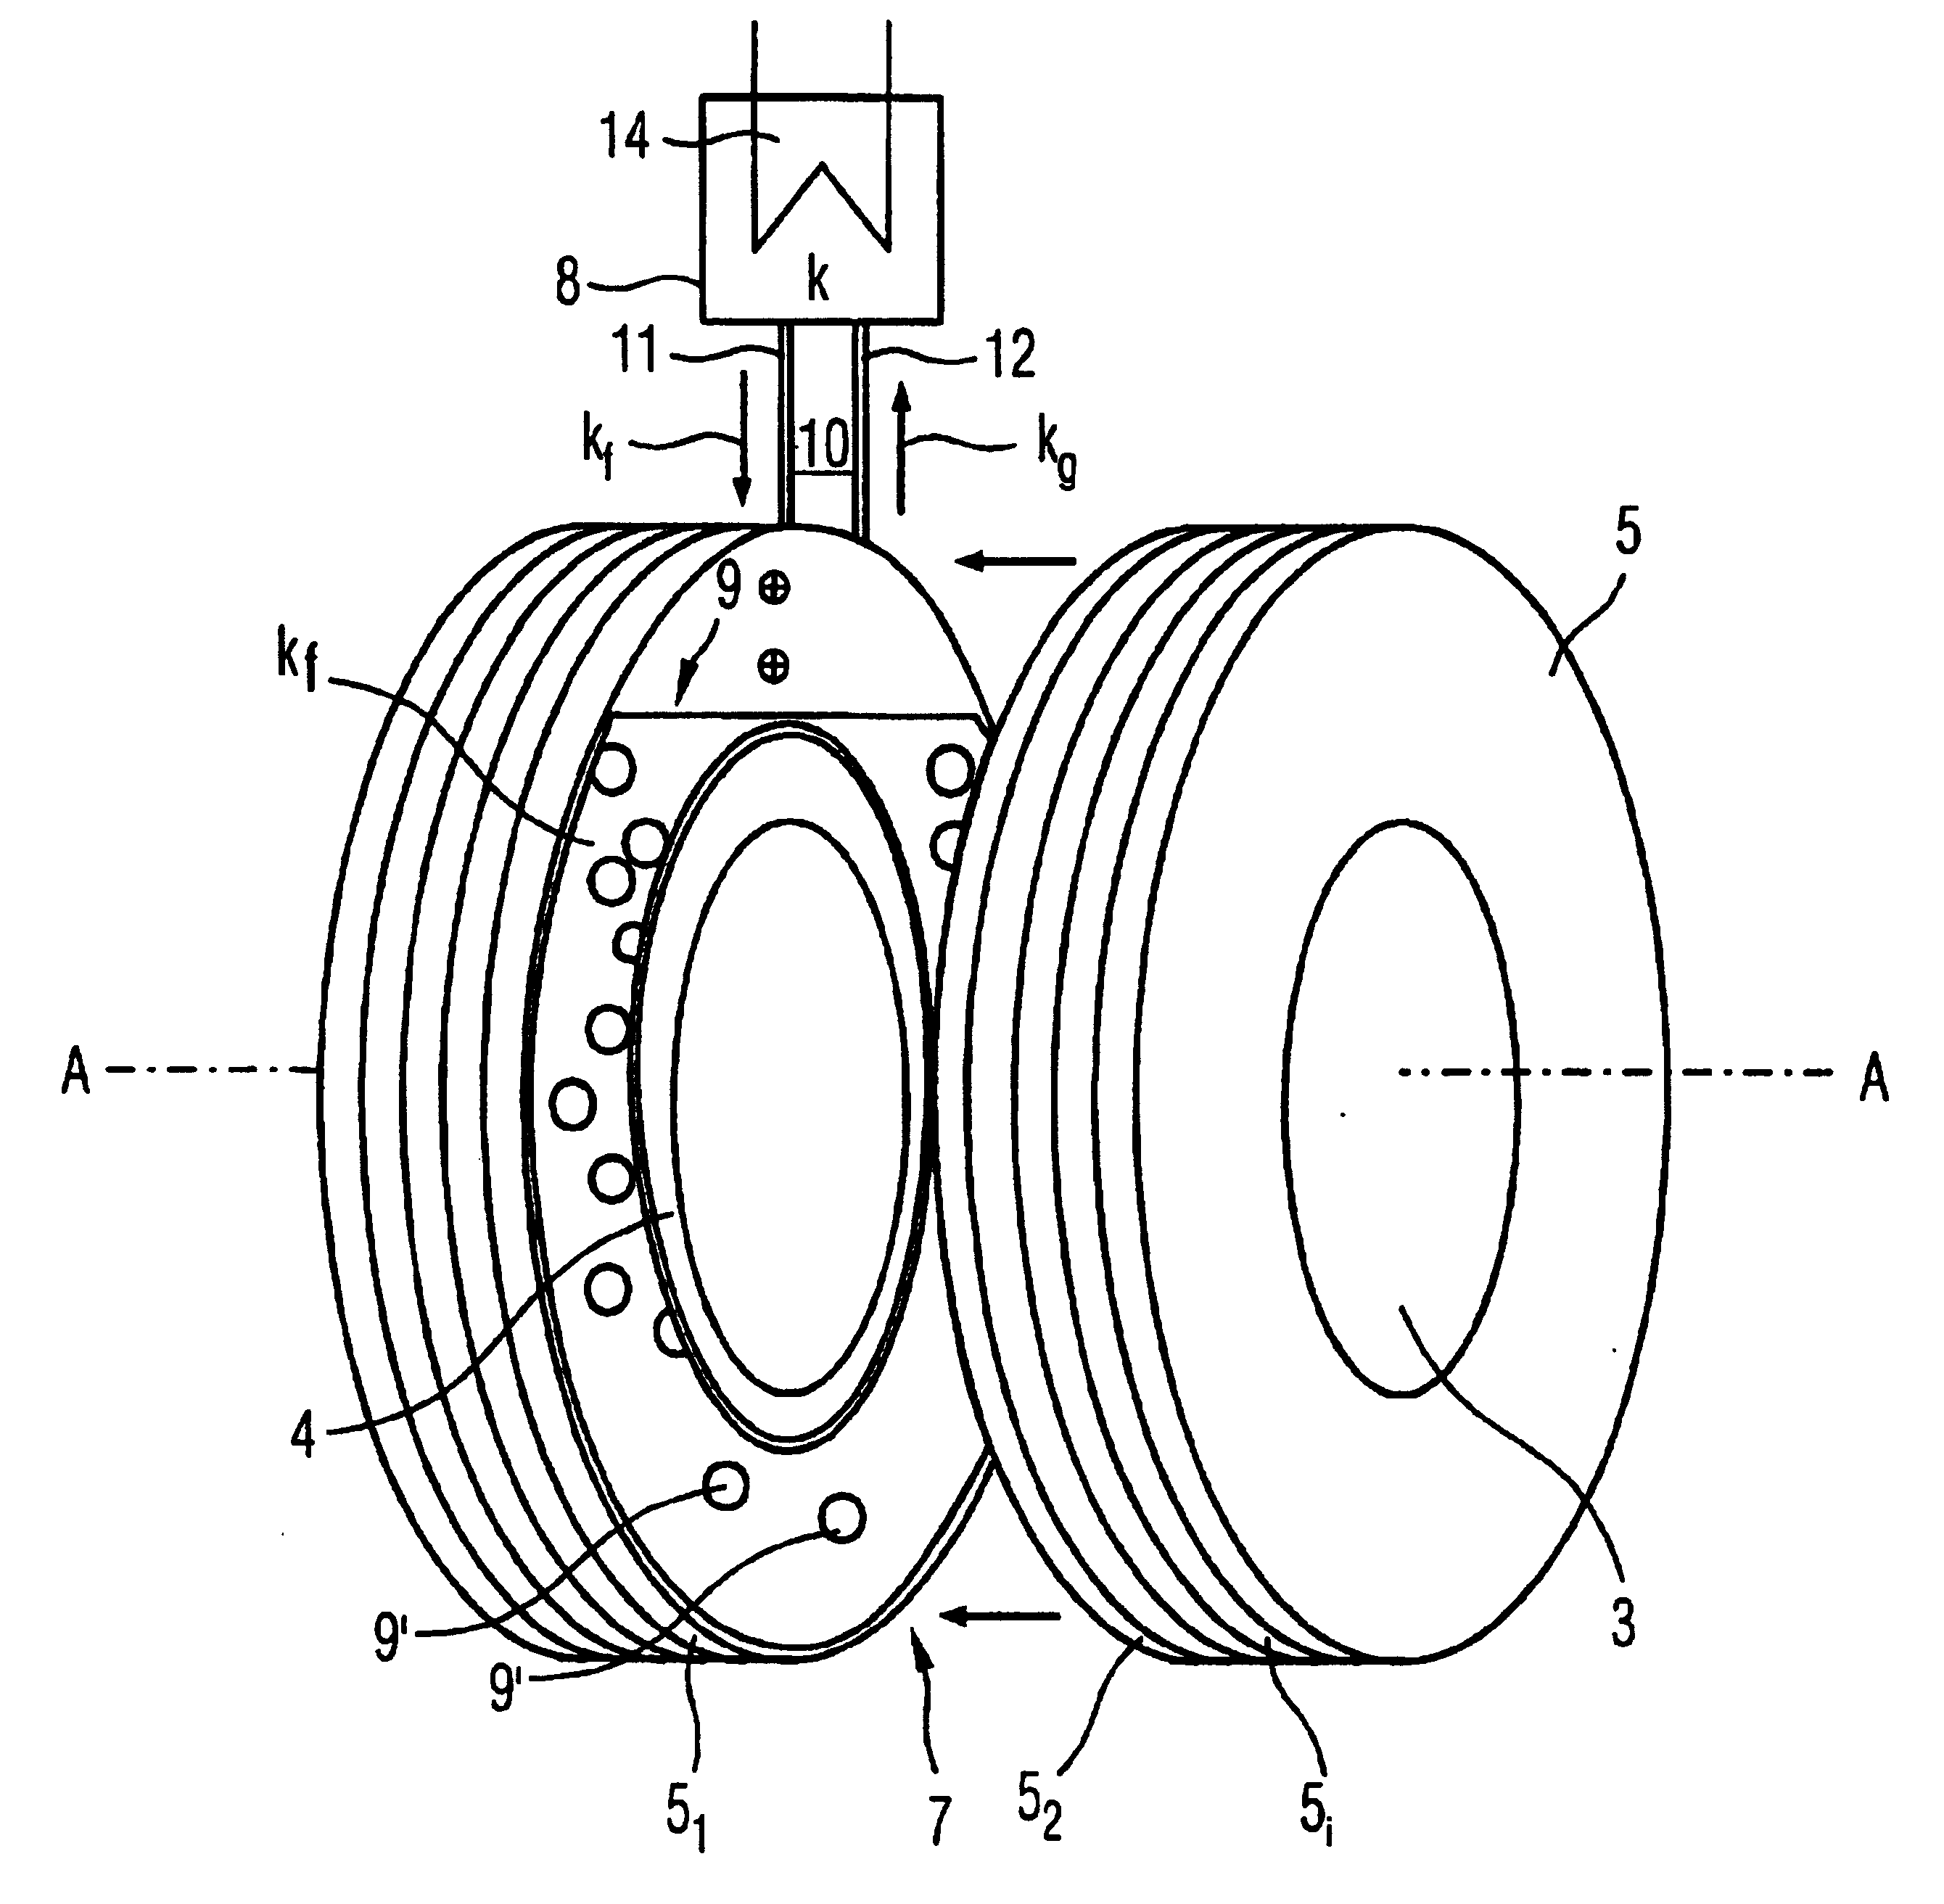 Electric motor comprising a stator cooling unit